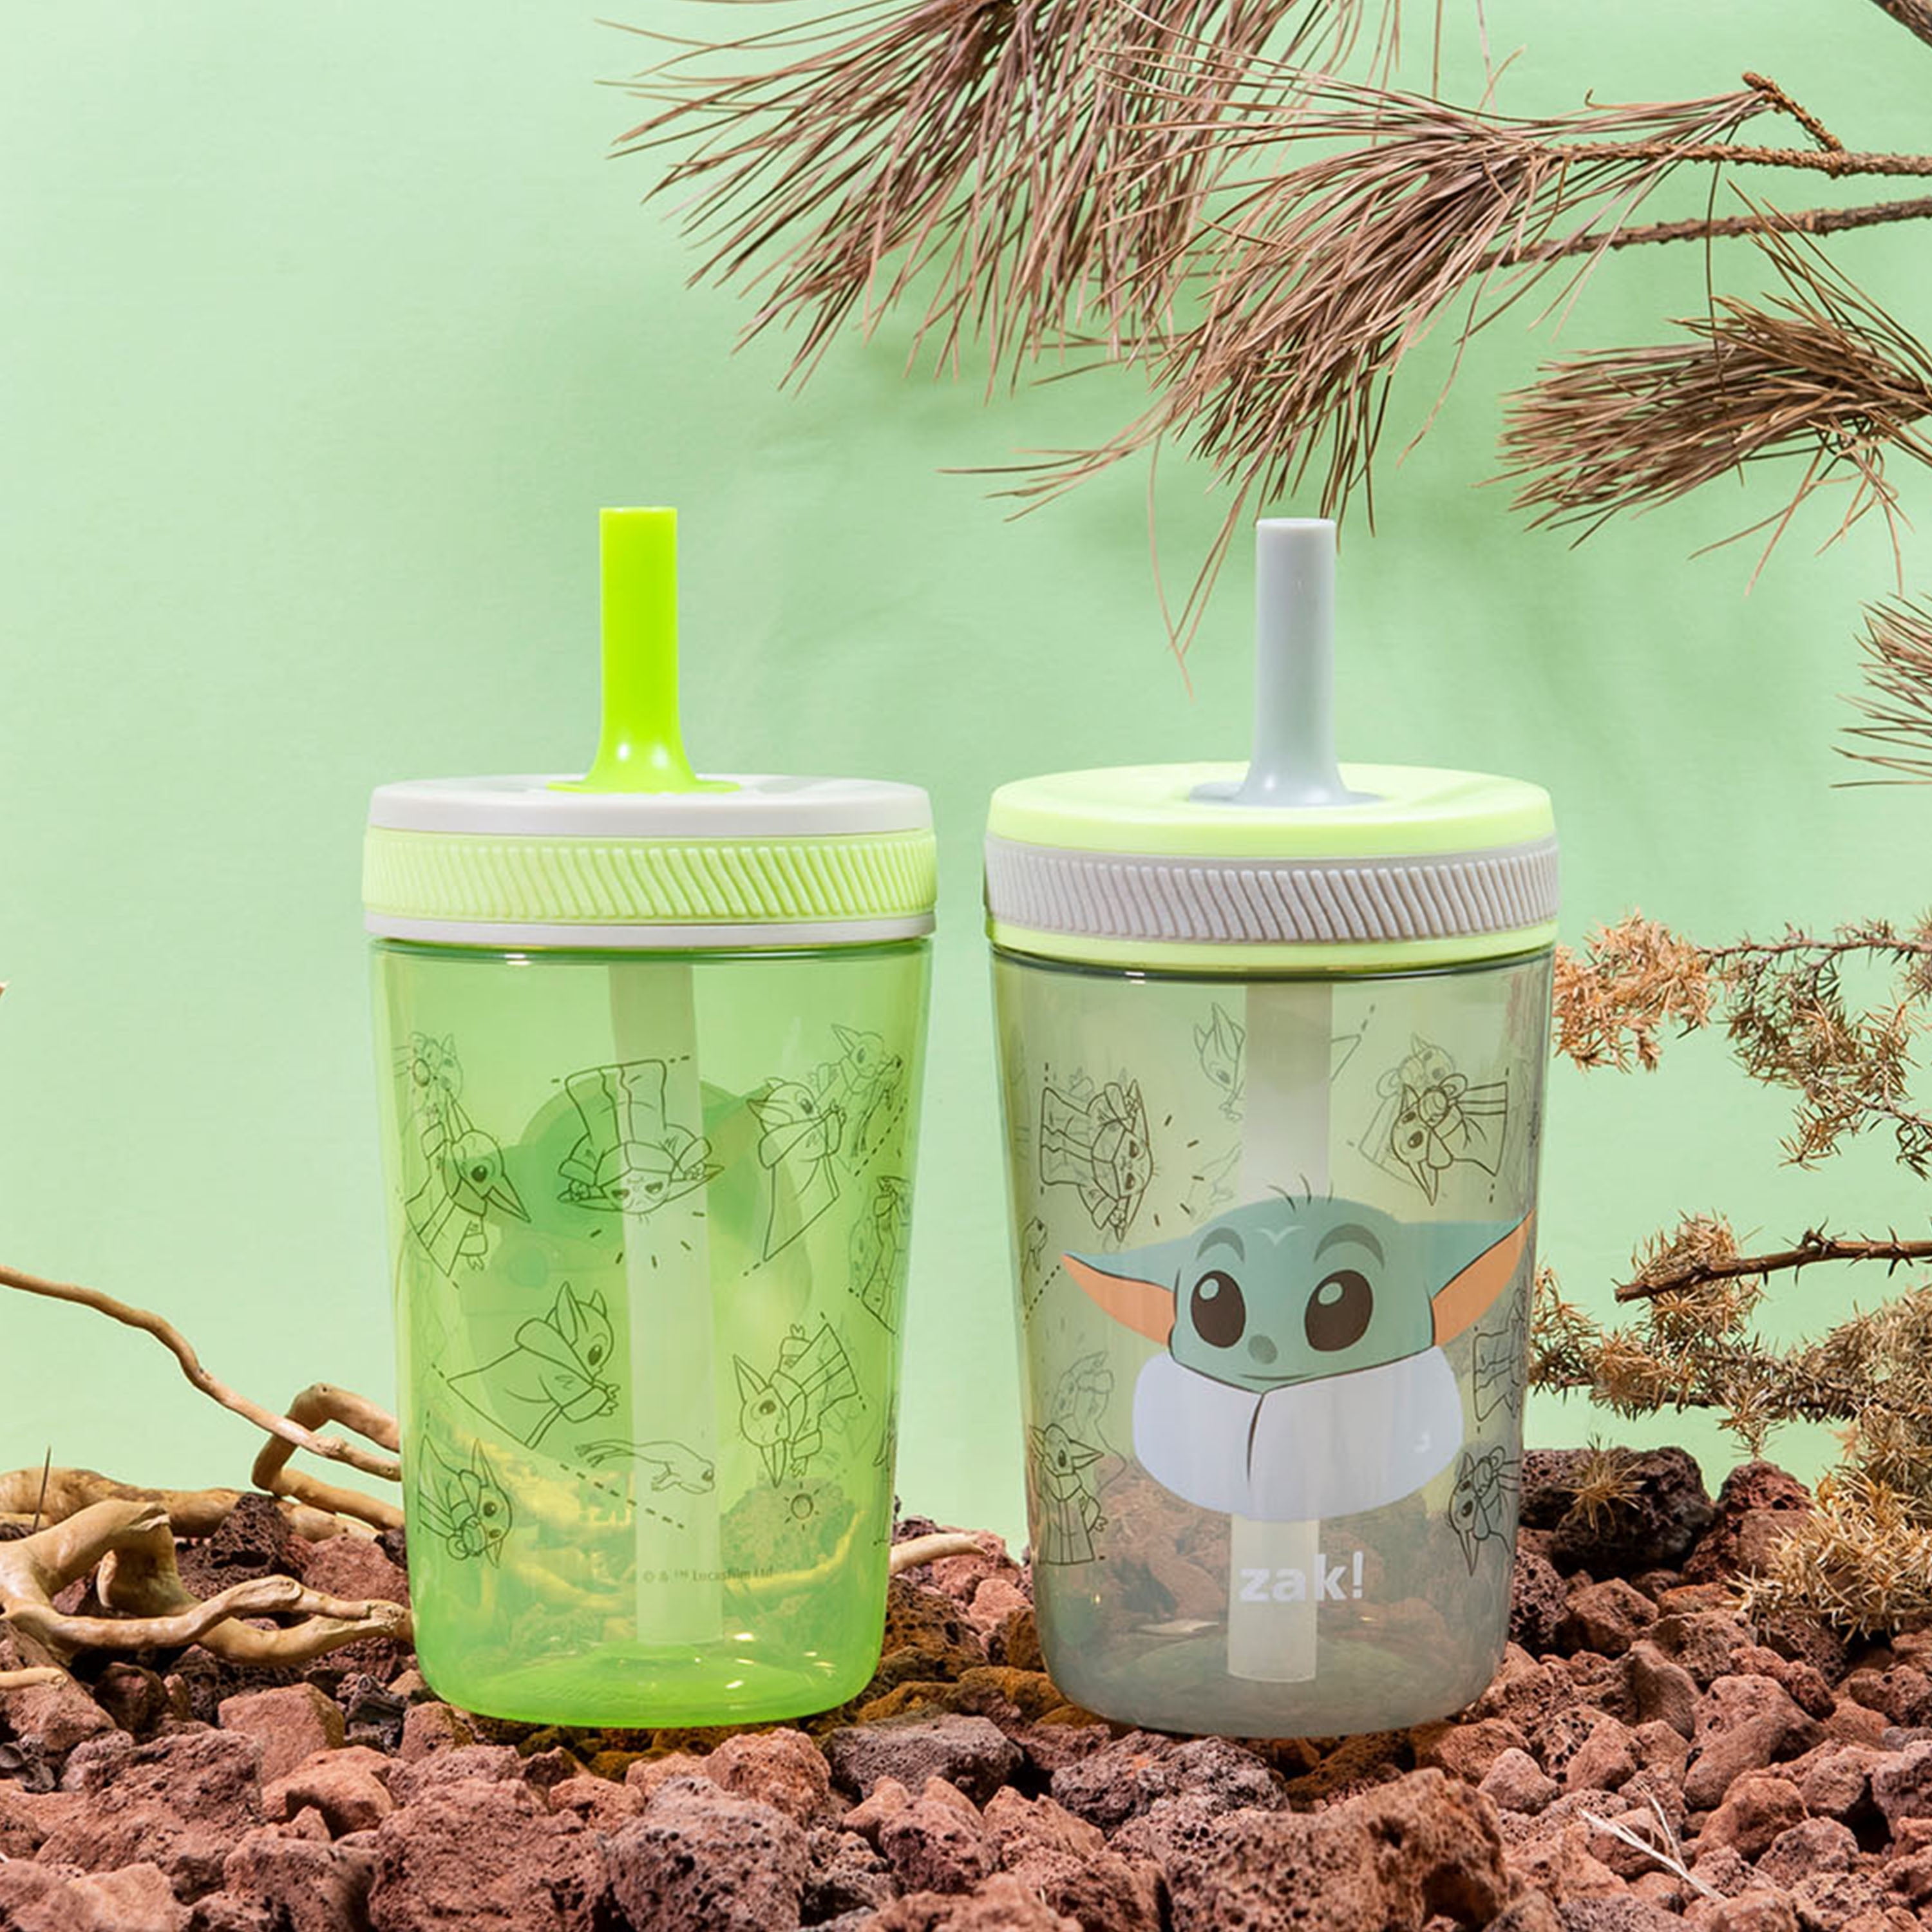 Zak Designs 15 oz Travel Straw Tumbler Plastic and Silicone with Leak-Proof  Straw Valve for Kids, 2-Pack Buzz Lightyear and Friends 